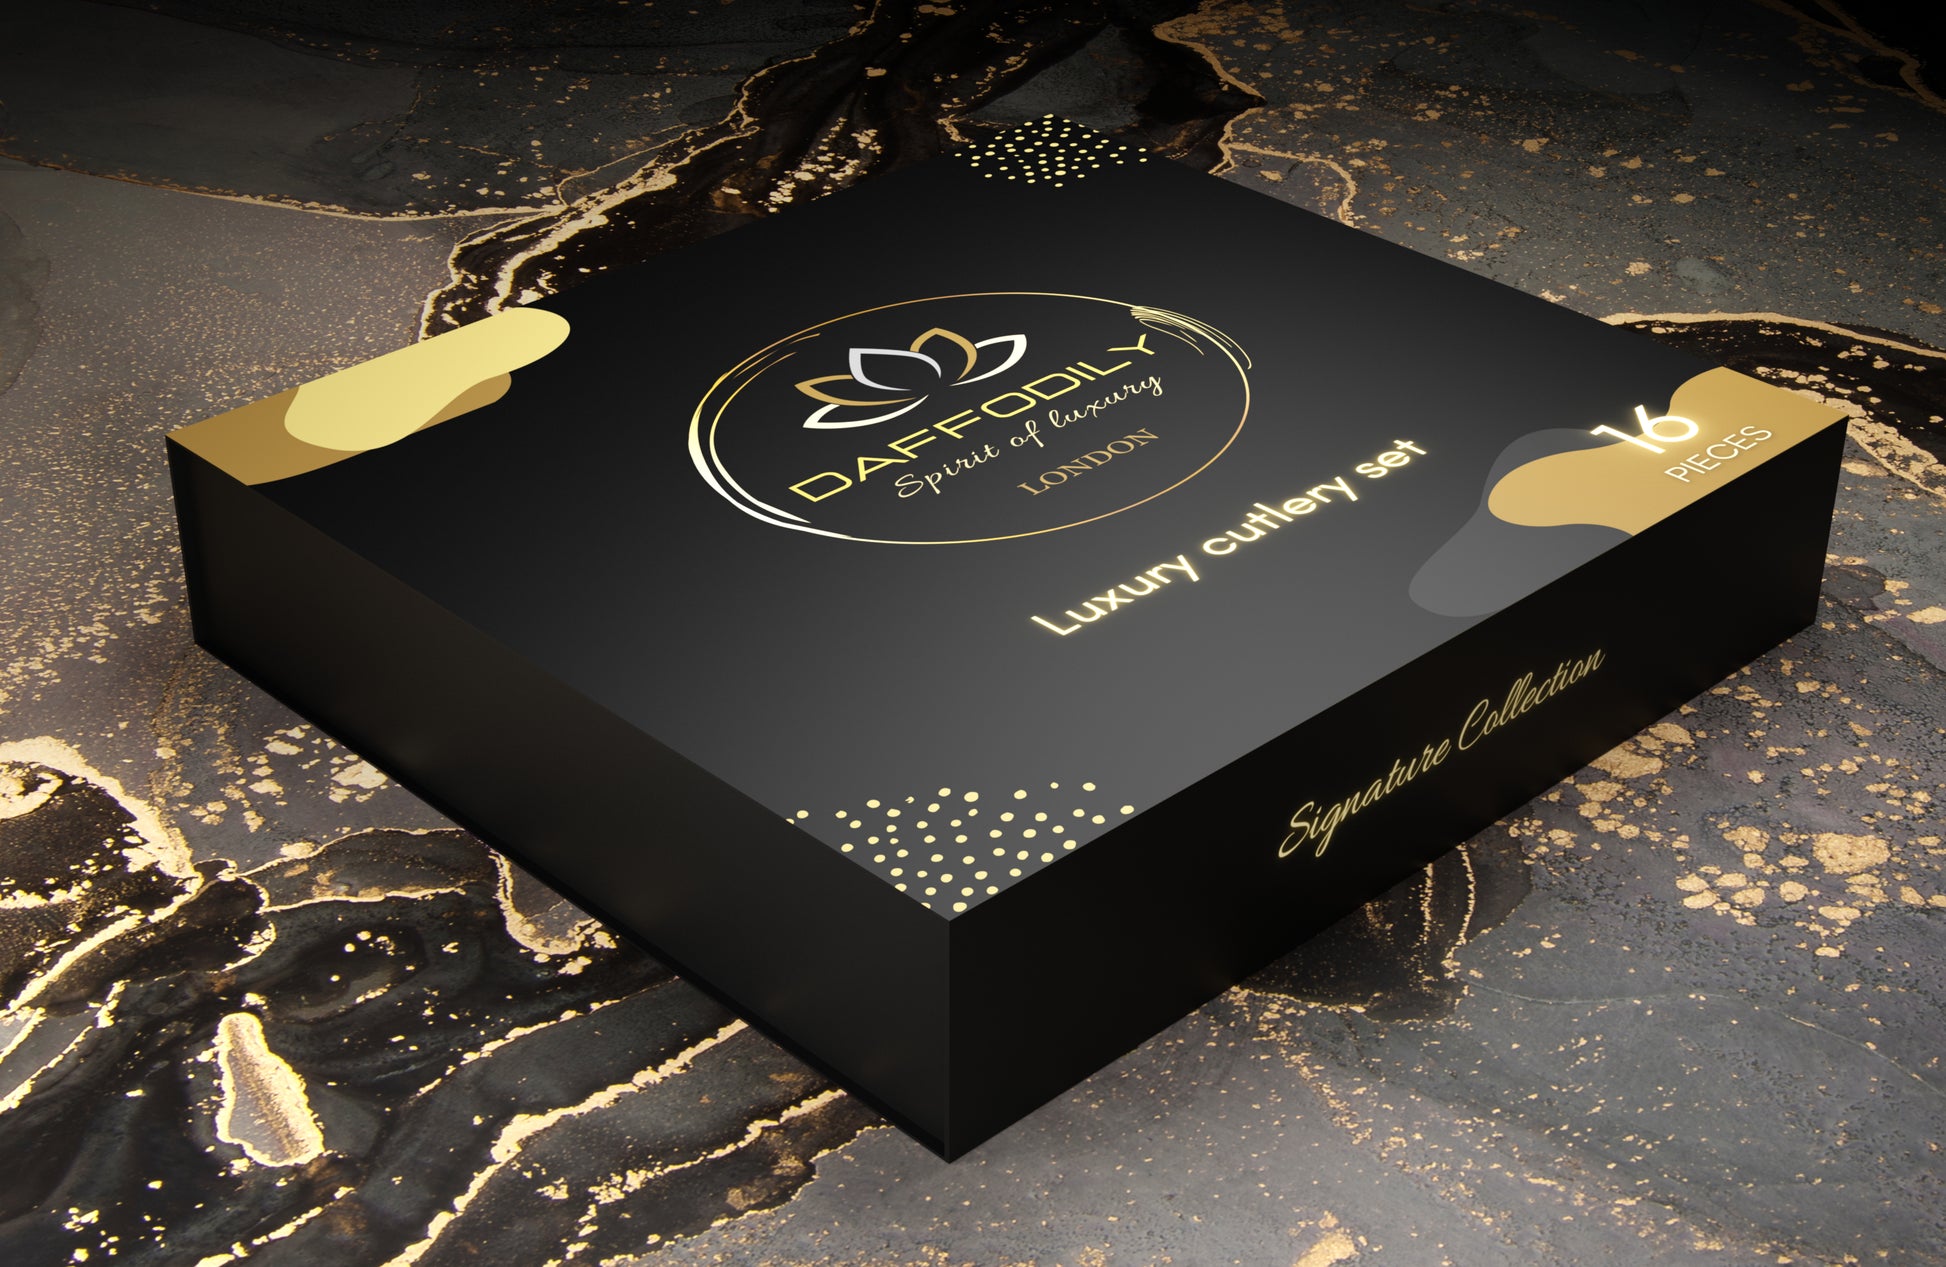 Premium gift box packaging for Daffodily cutlery sets